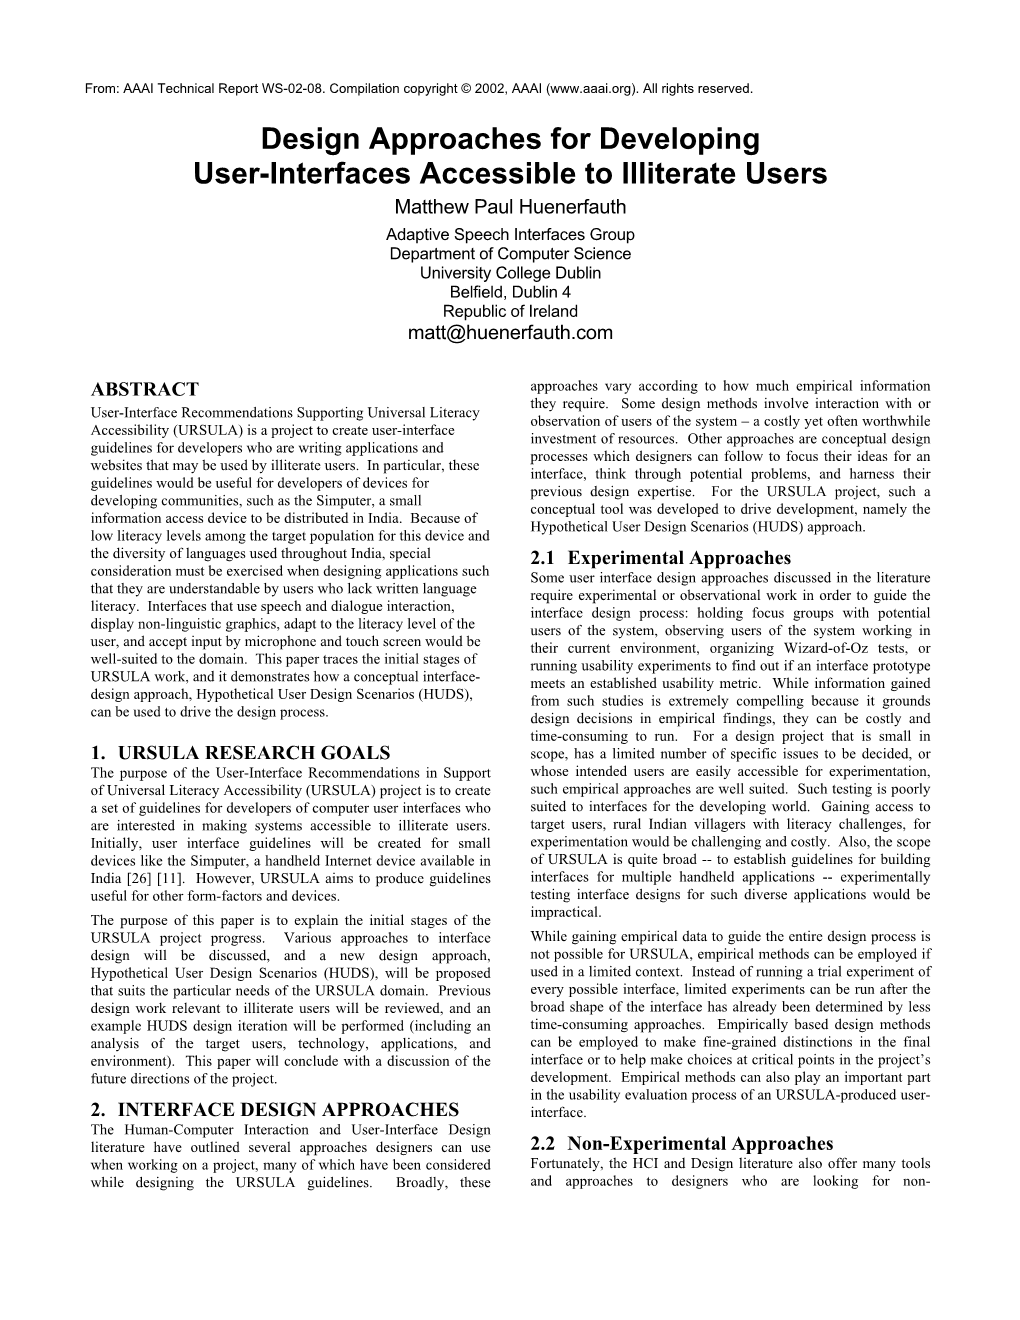 Design Approaches for Developing User-Interfaces Accessible To